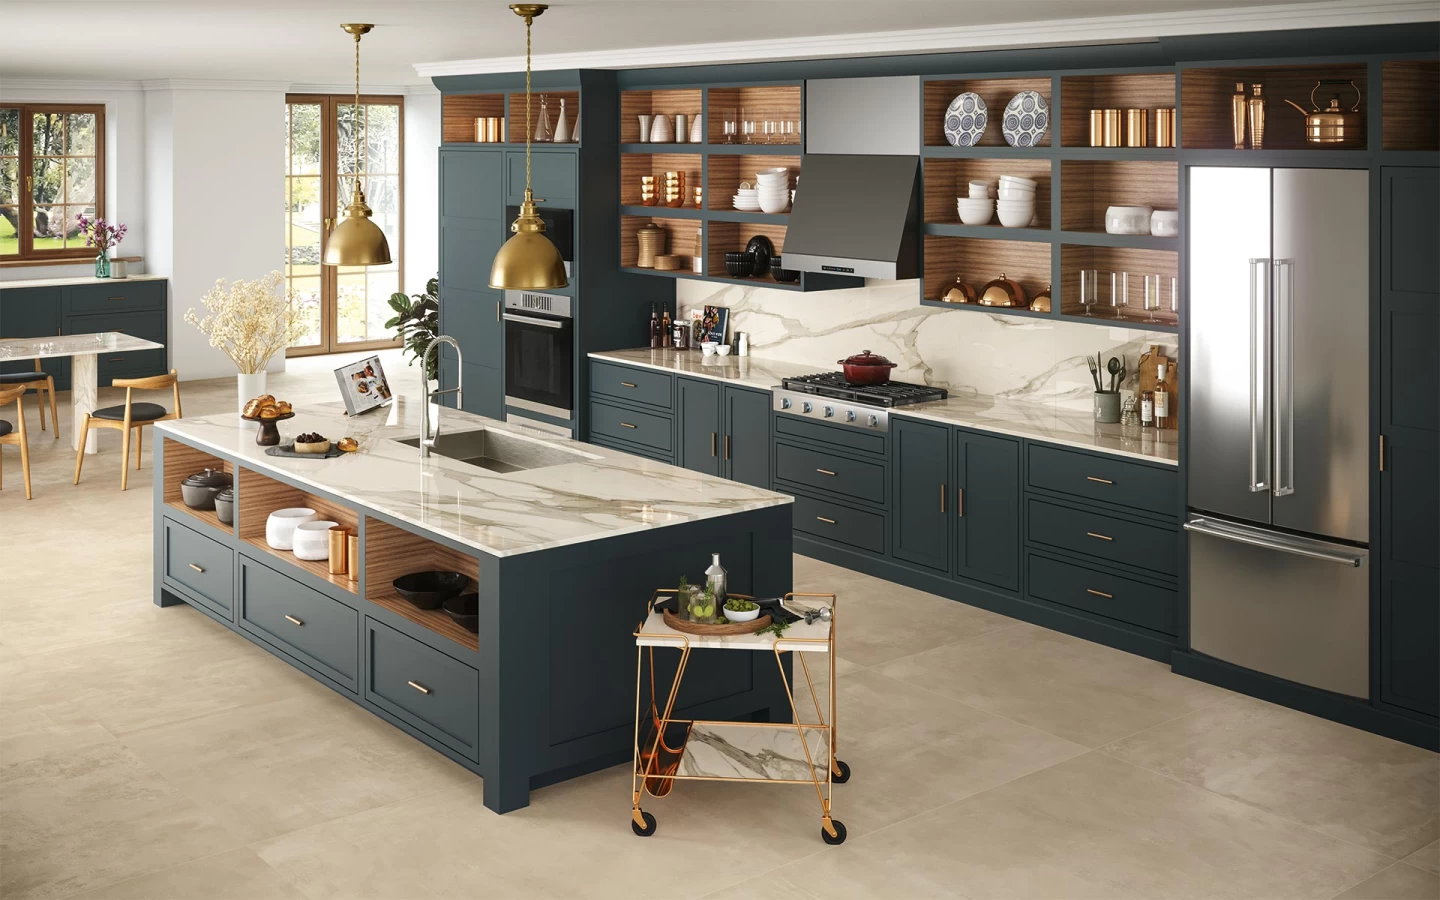 Kitchen with classic island - Atlas Plan